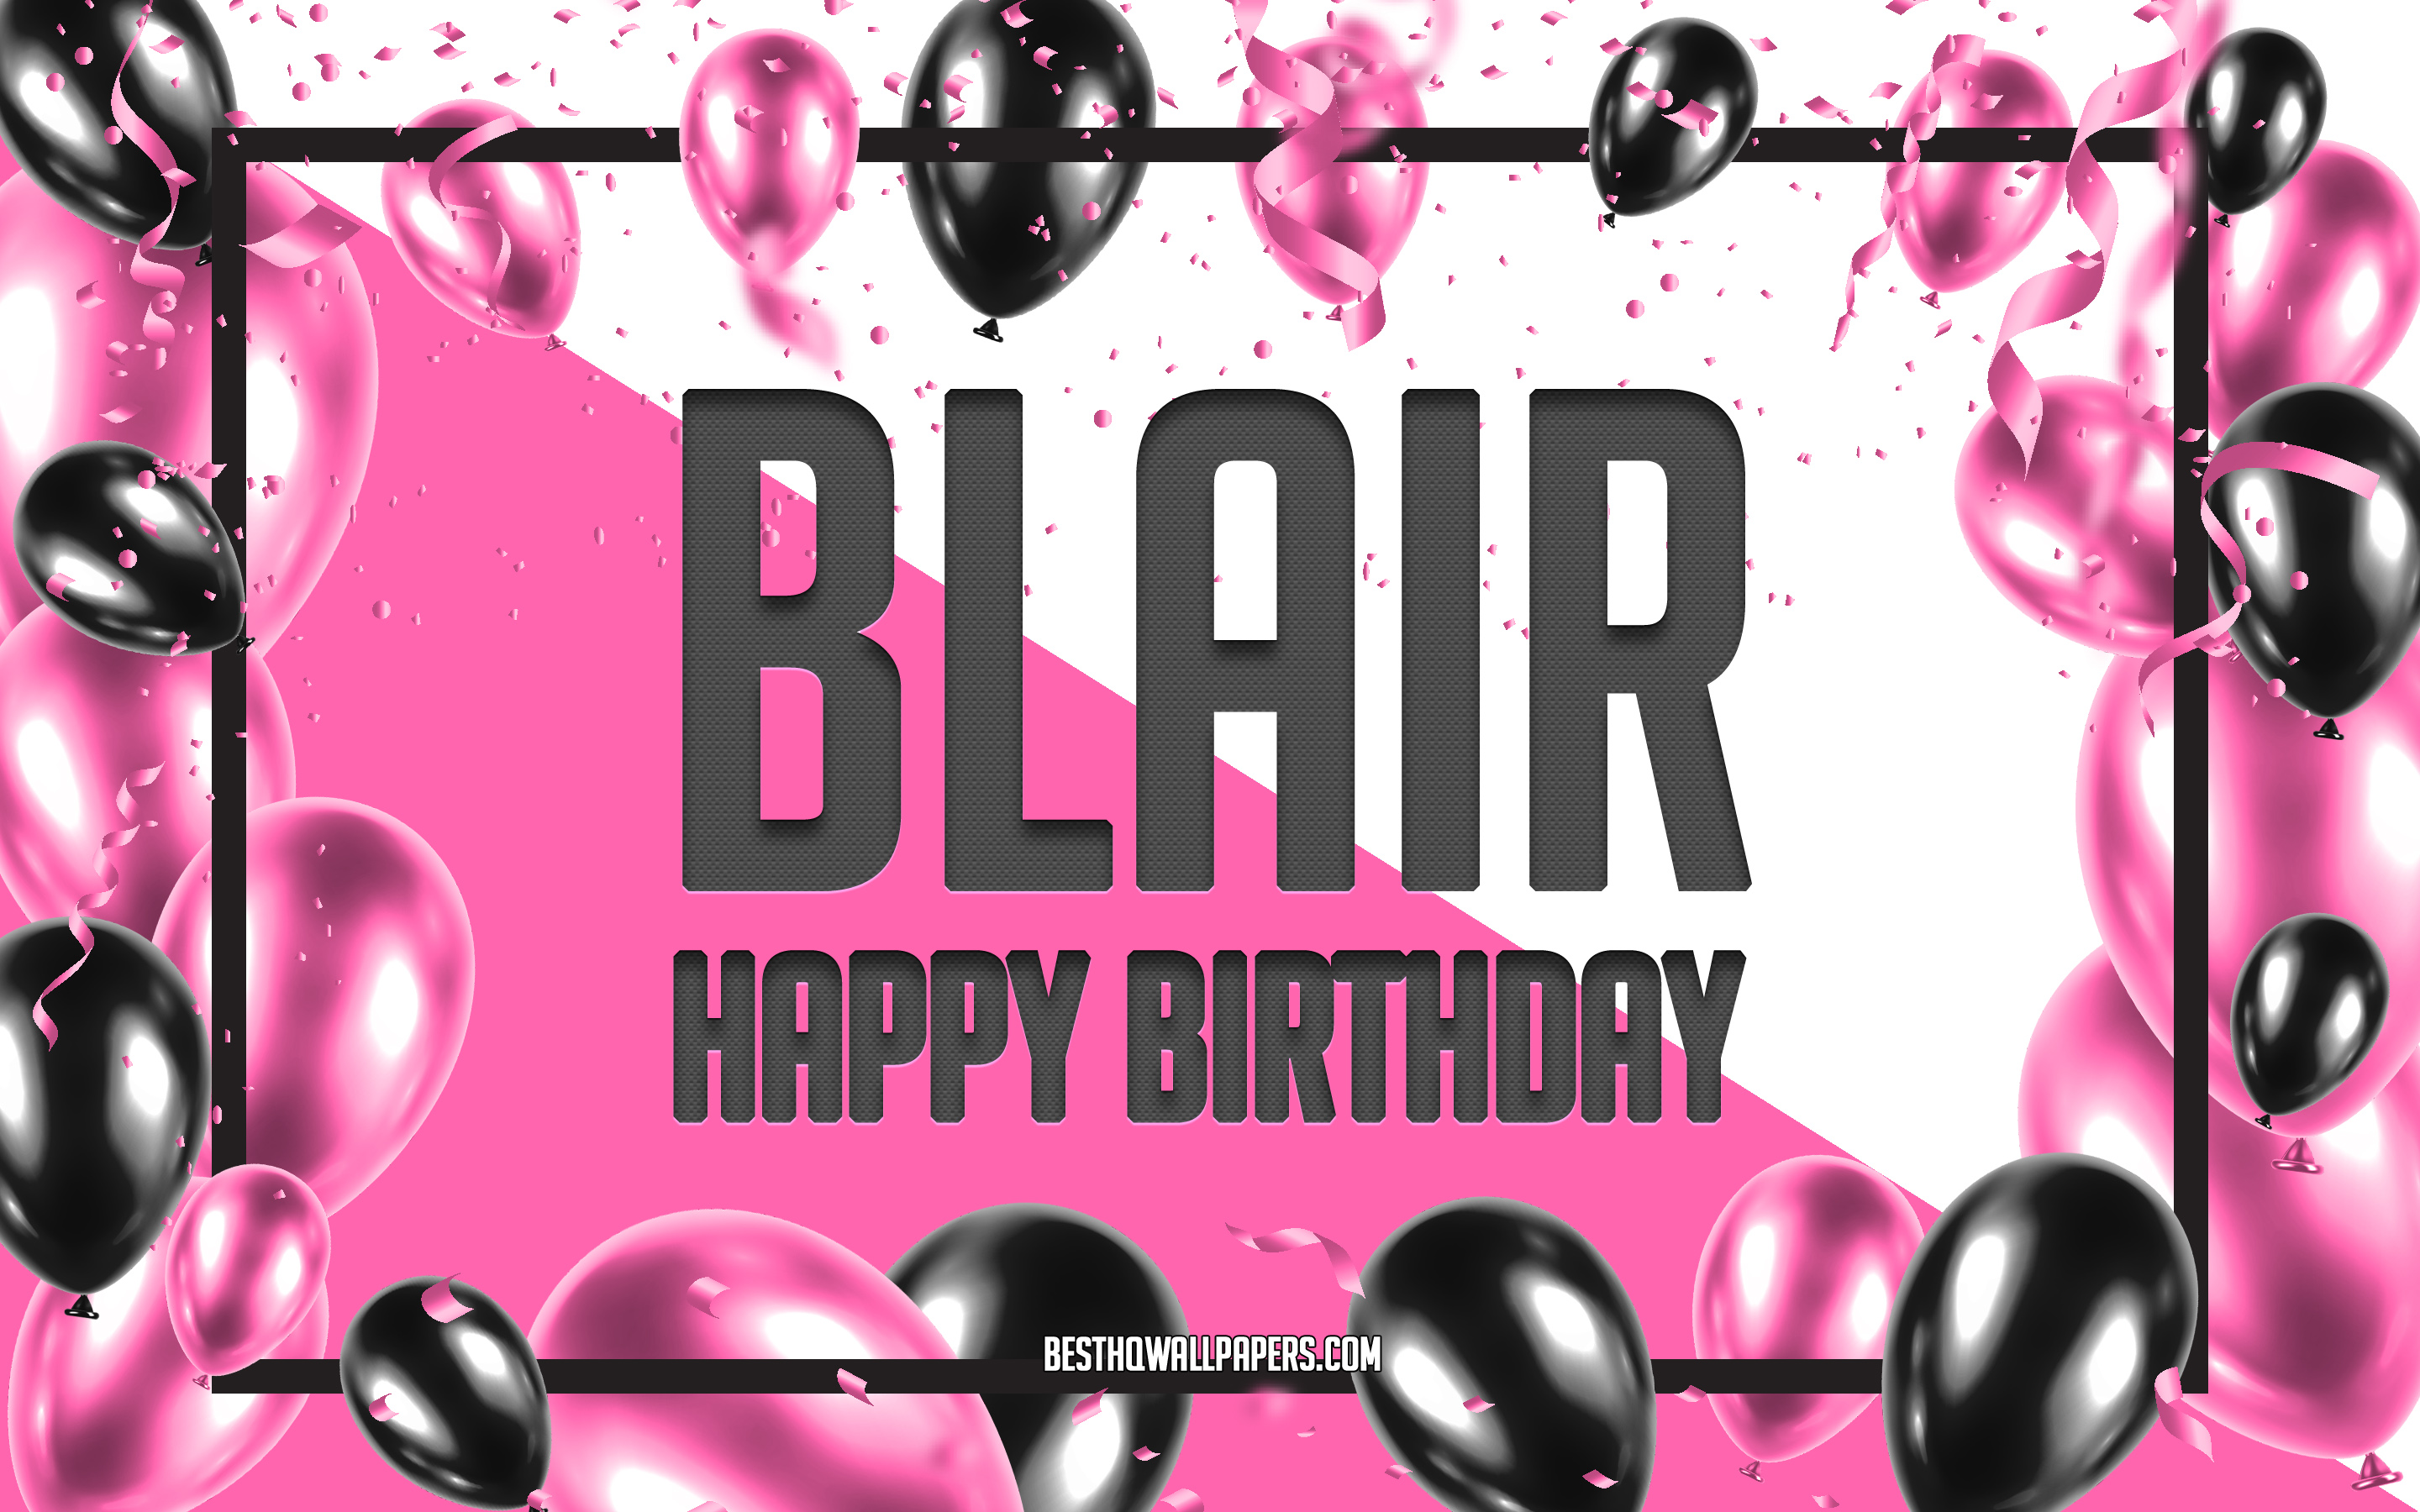 Download Wallpapers Happy Birthday Blair Birthday Balloons Background